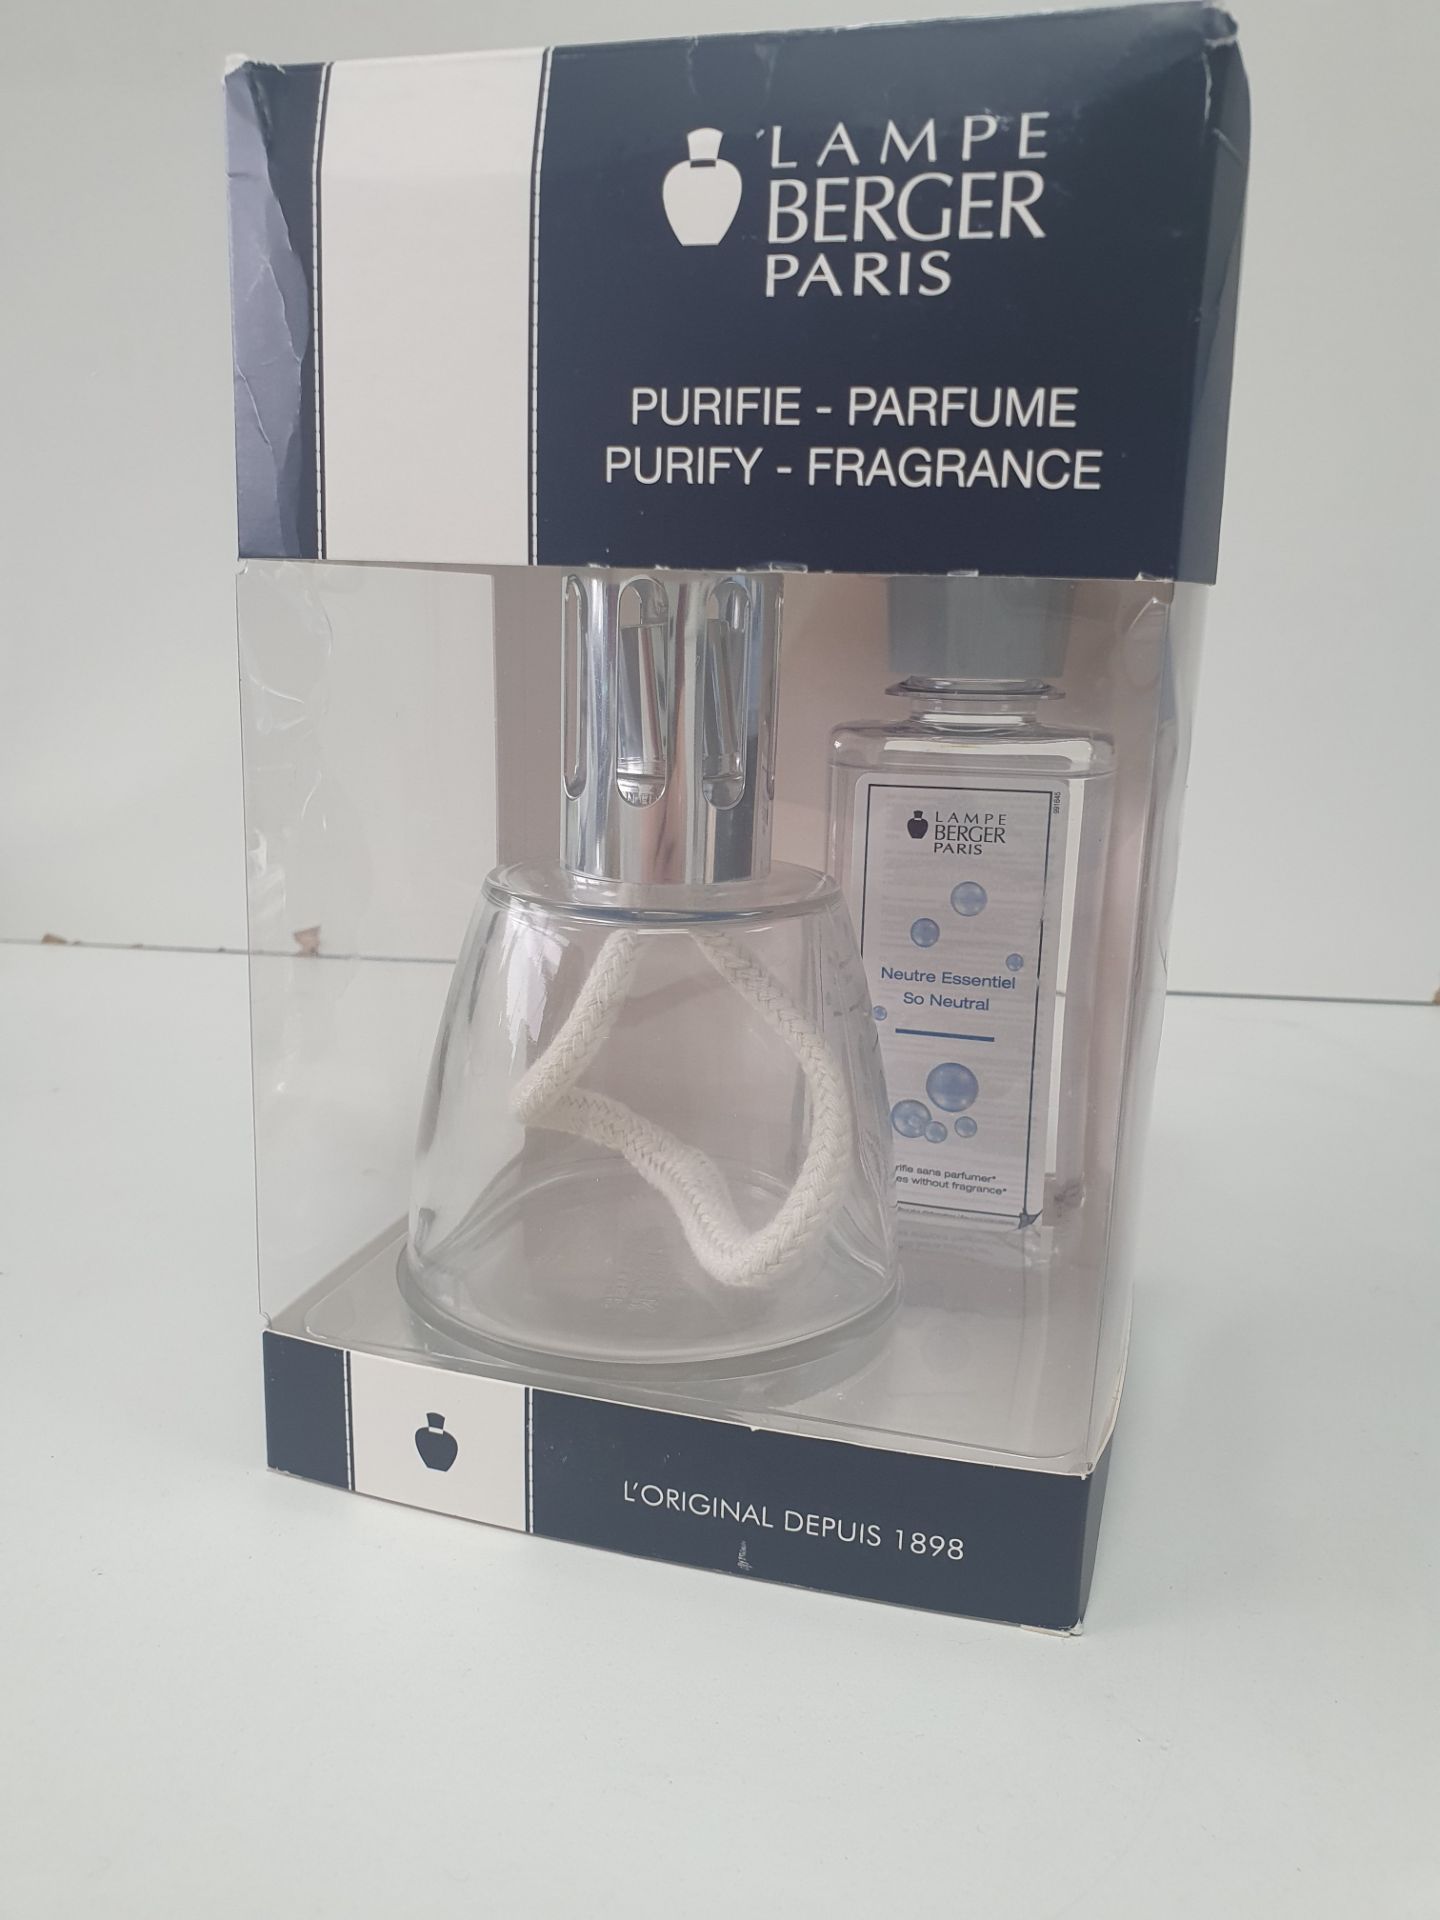 Lampe Berger Paris Diffuser with Fragrance